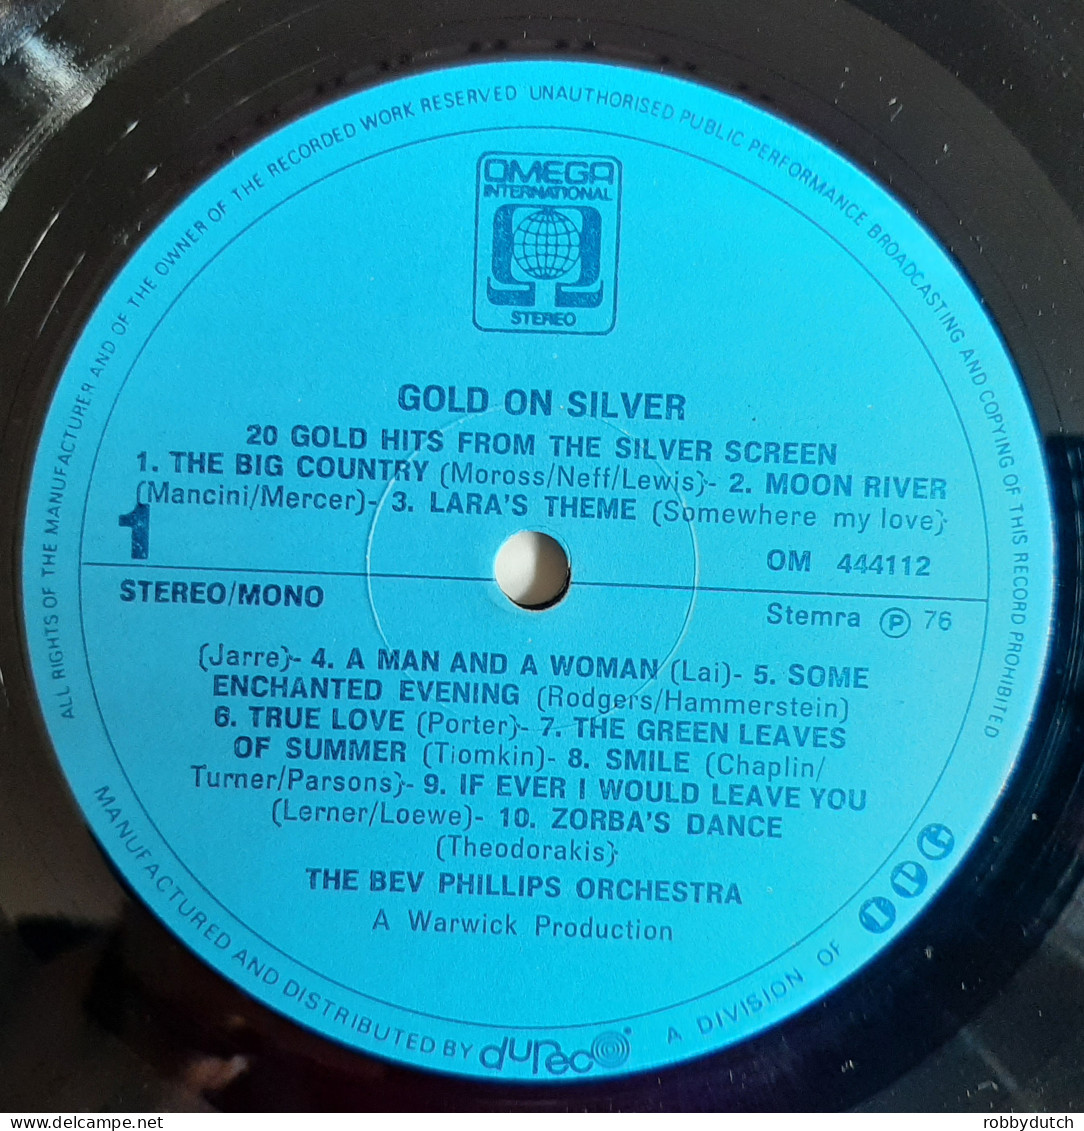 * LP * BEV PHILIPS ORCHESTRA: HOLLYWOOD - 20 GOLDEN FILM HITS (MILLION SELLERS) - Instrumentaal